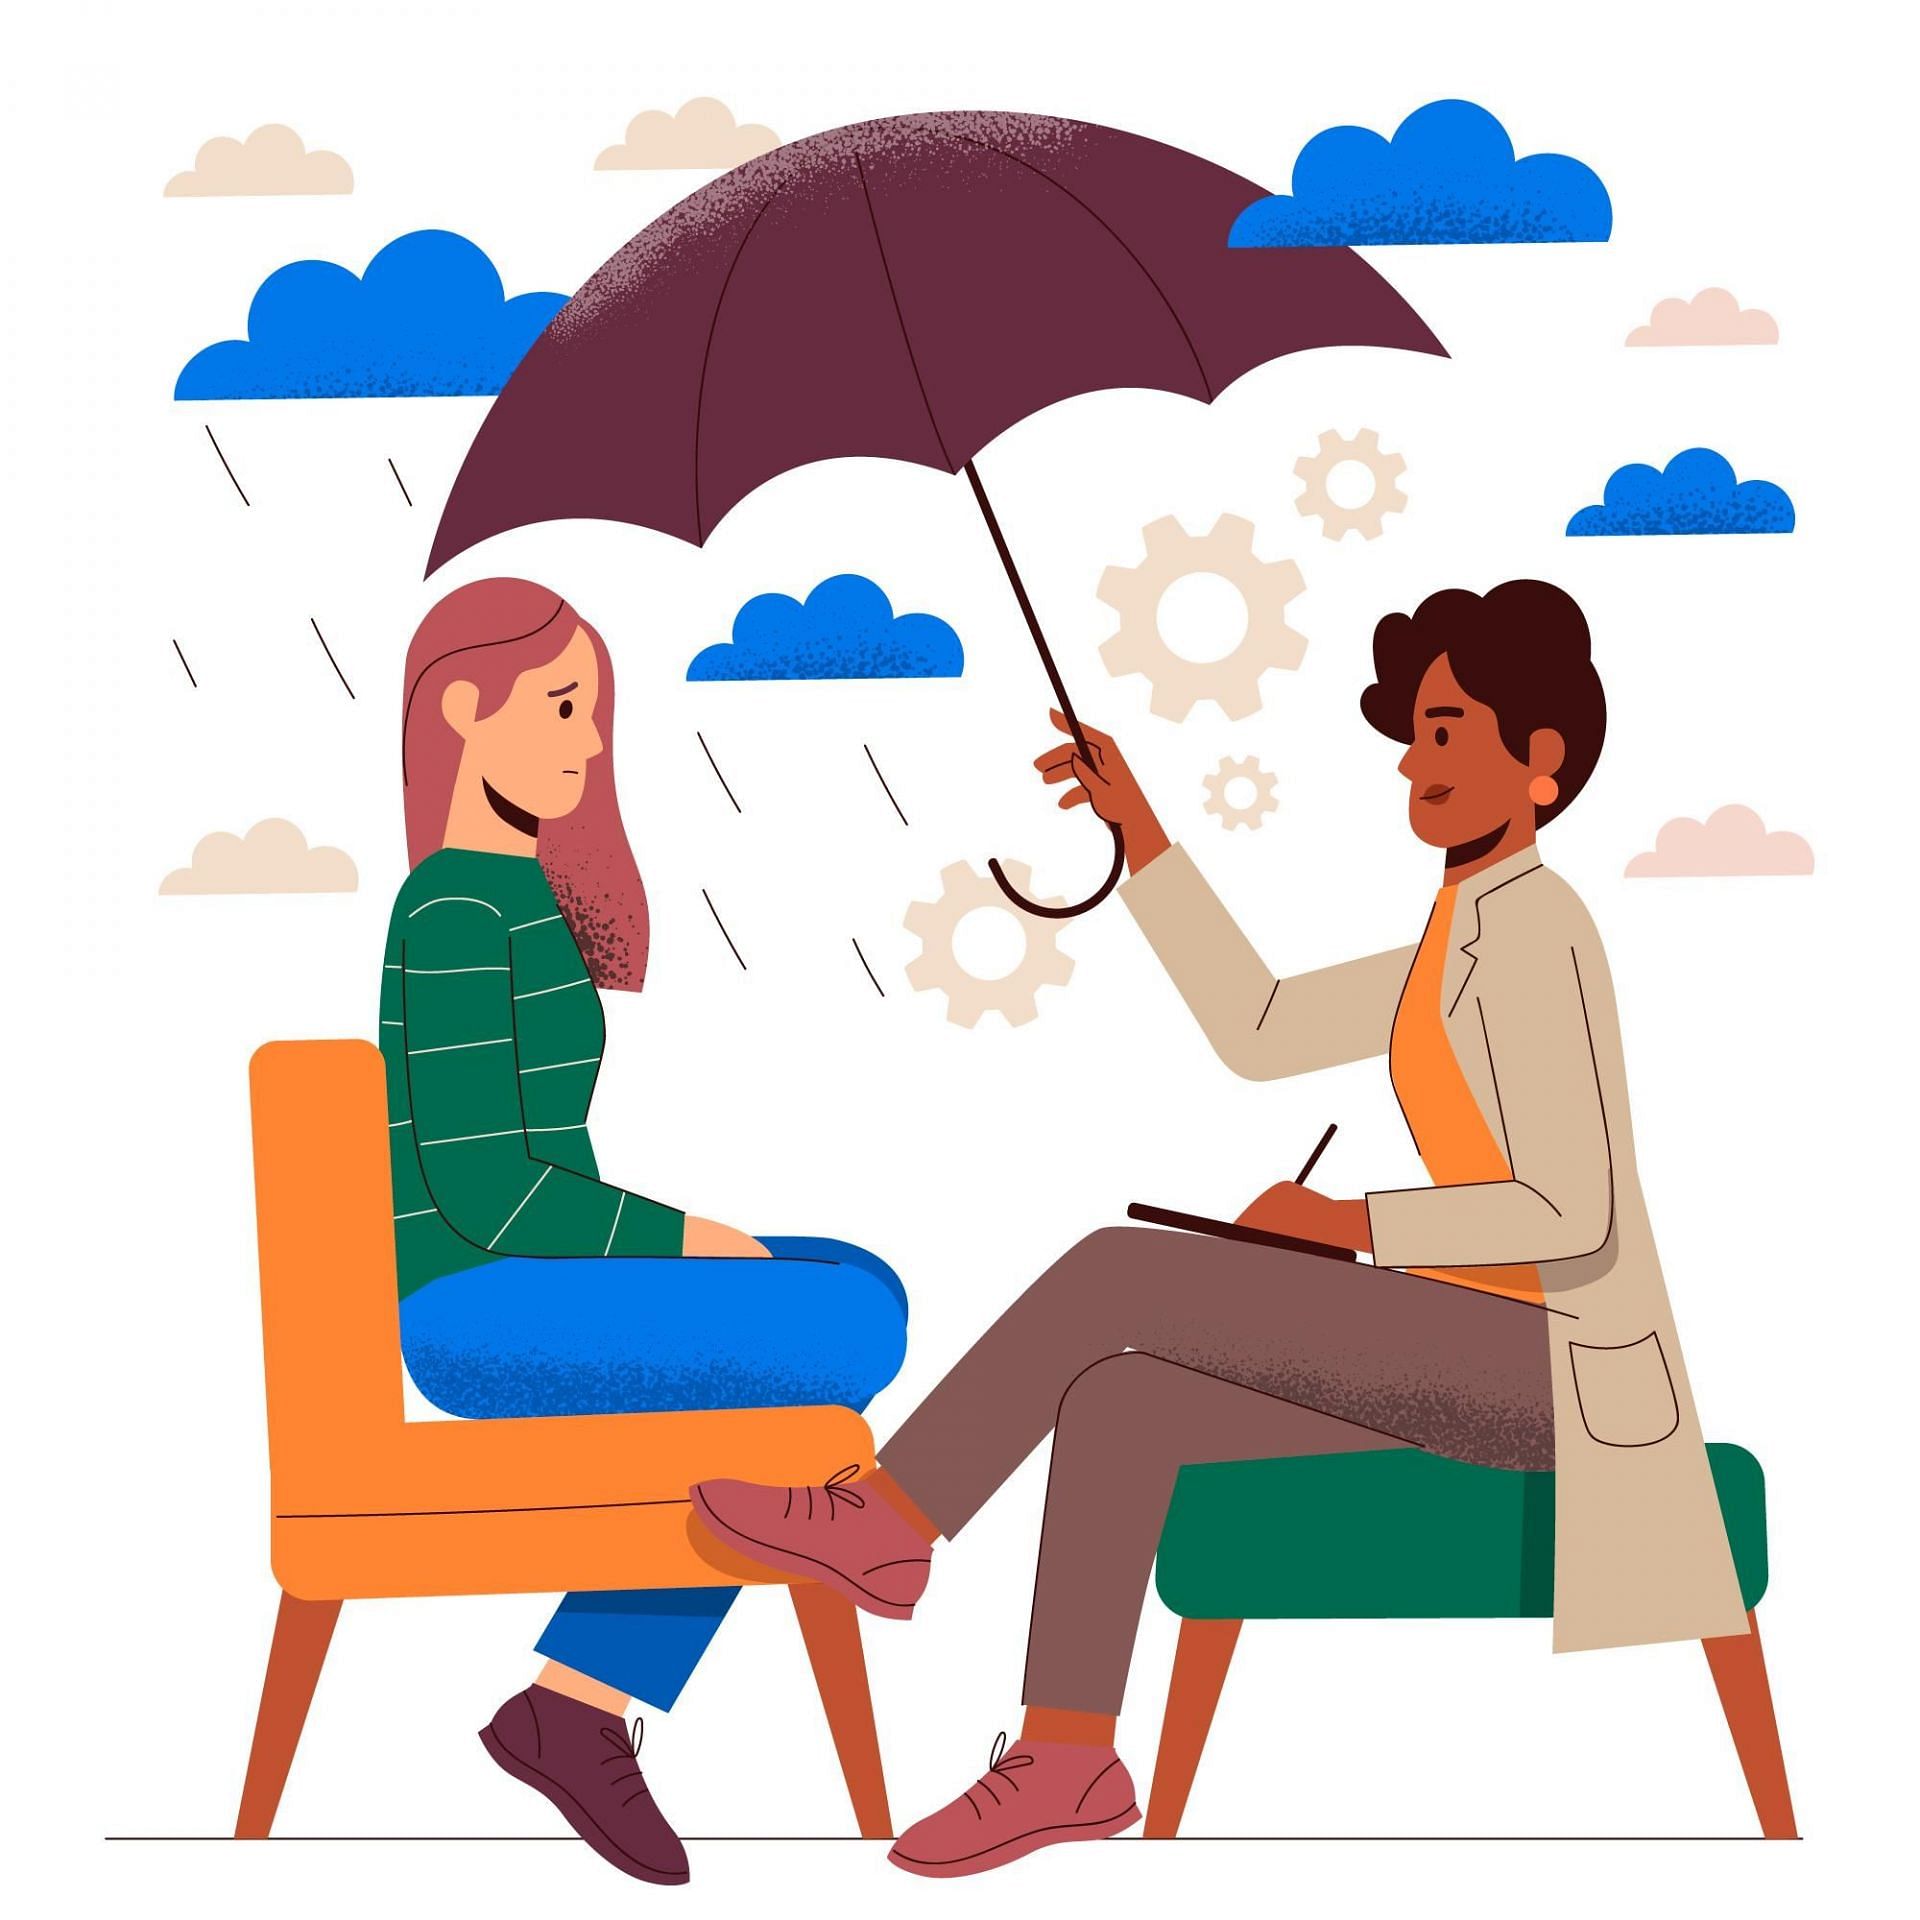 What does it mean to receive a mental health diagnosis? How is different from physical health diagnosis? (Image via Freepik/ Freepik)